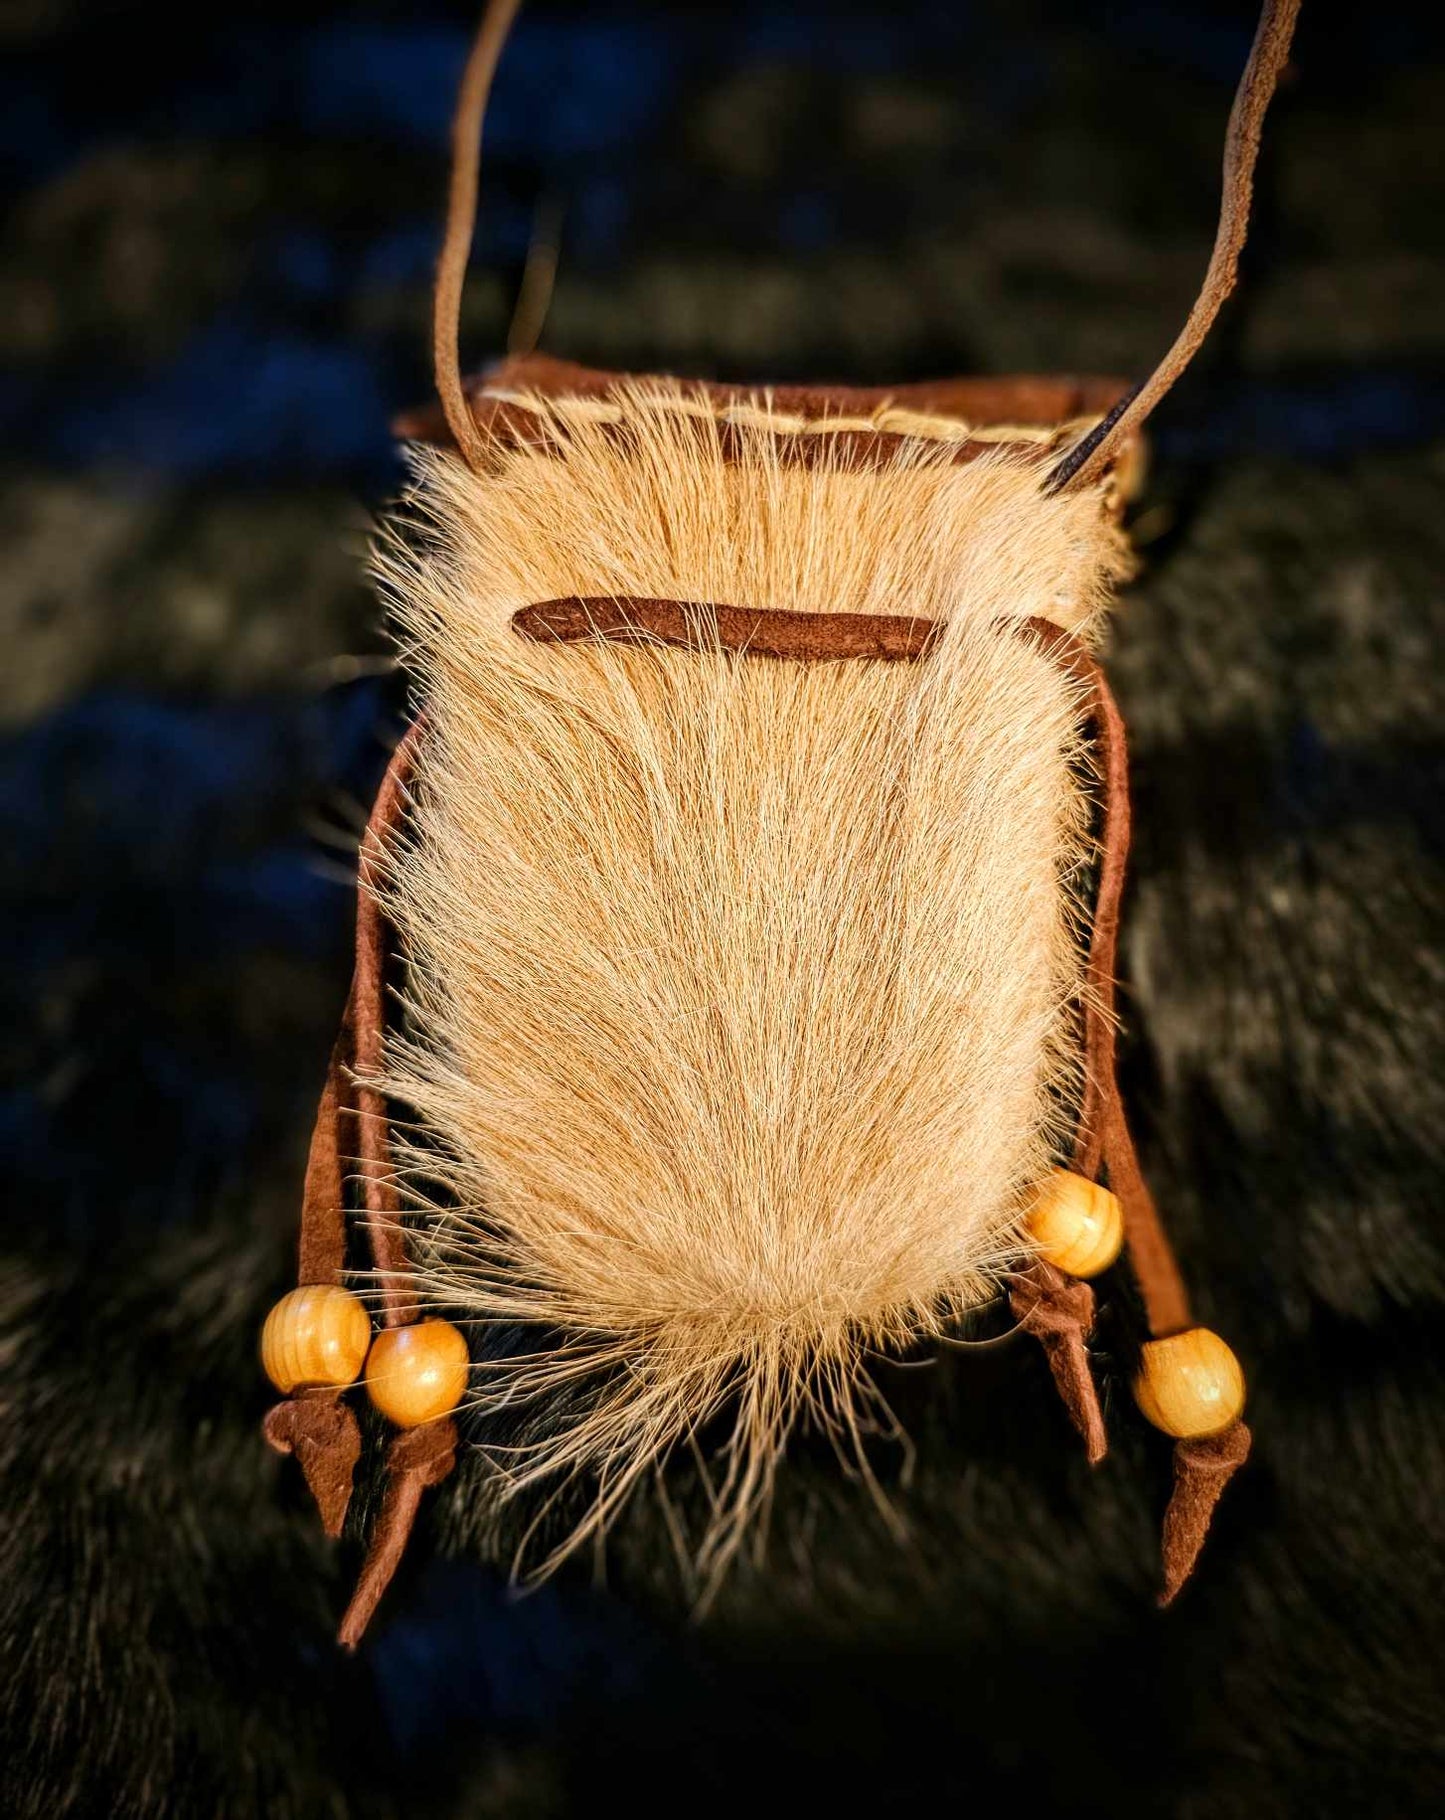 Hair On Cowhide and Suede Leather Pouch With Wood Beads